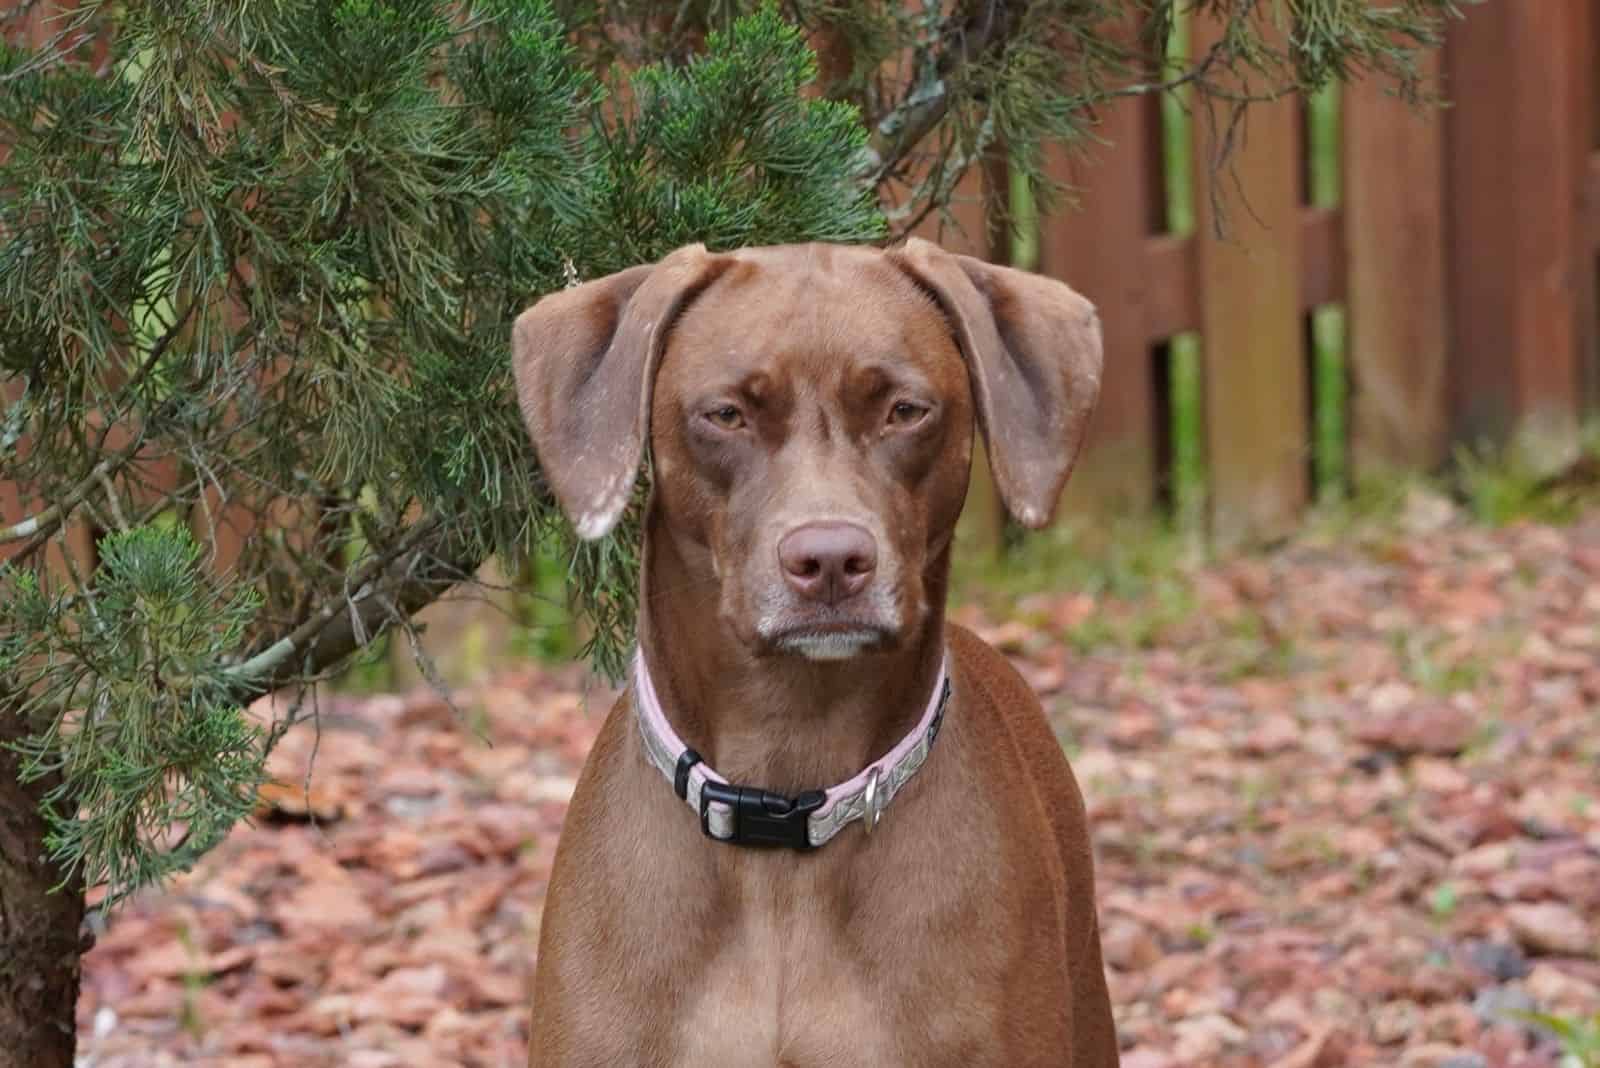 weimaraner pitbull mix standing outdoors in profile photography